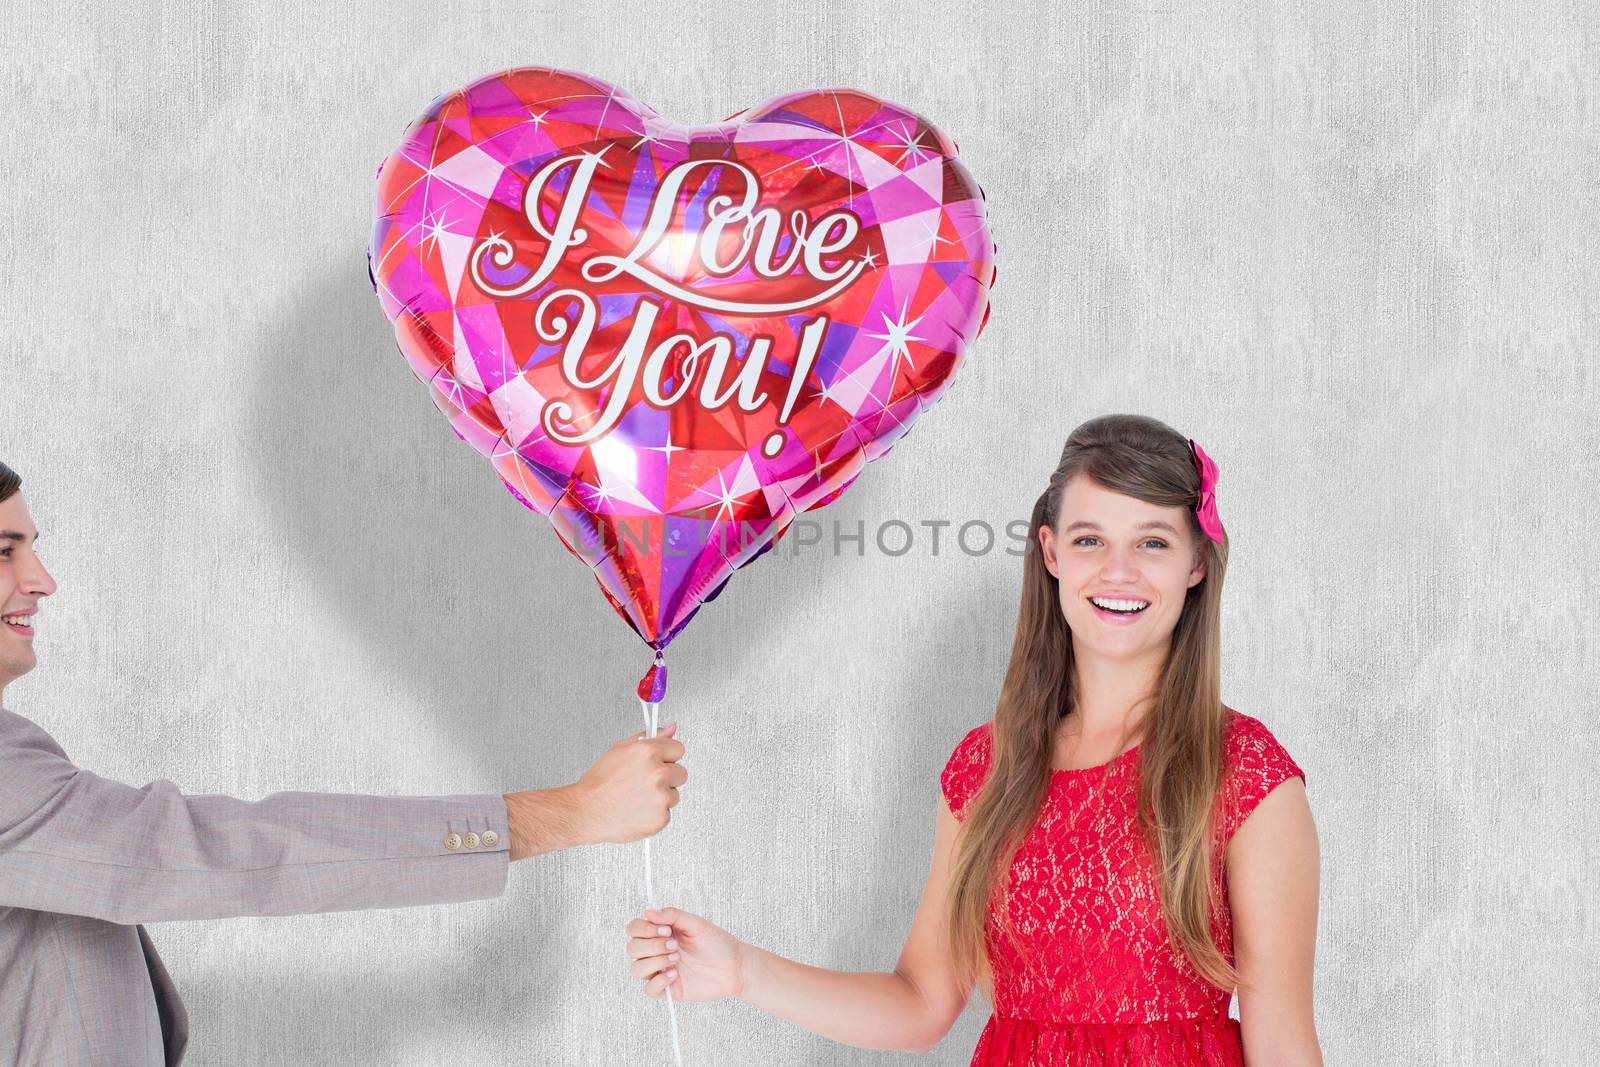 Geeky hipster offering red heart shape balloon to his girlfriend against white background